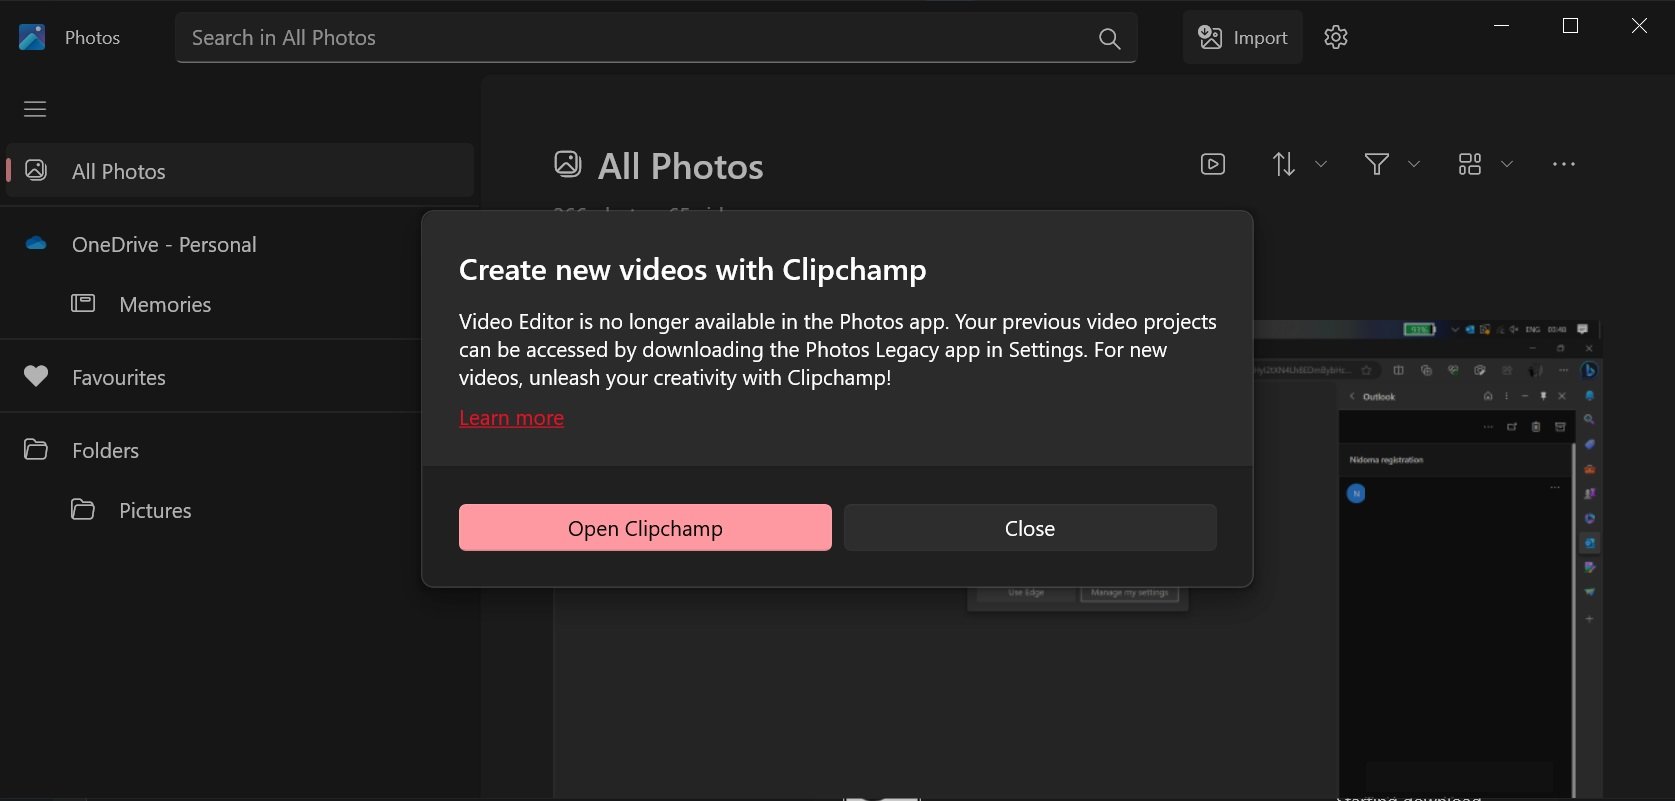 Microsoft is replacing Windows 10’s Video Editor with web-based Clipchamp